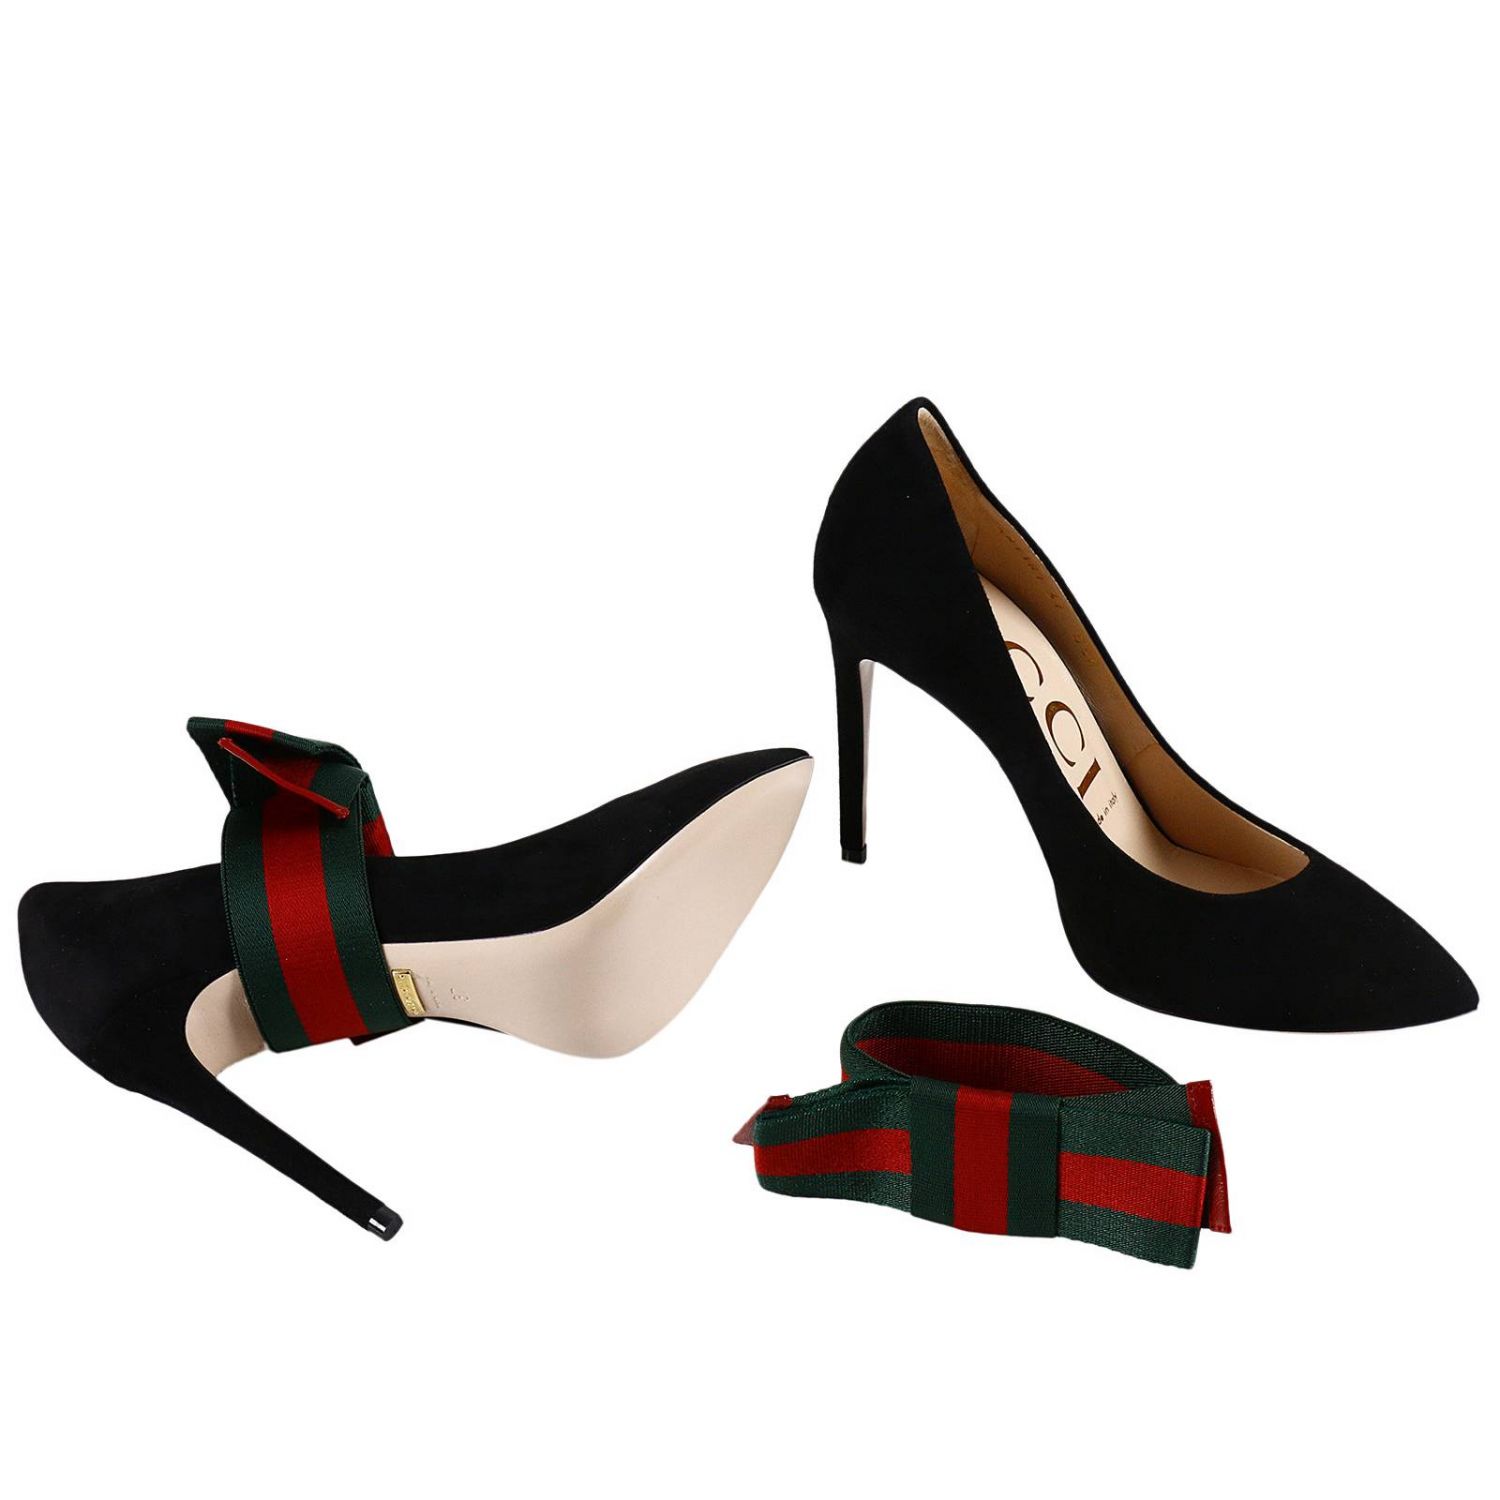 farvestof Overvåge opretholde GUCCI: Bow Pumps in suede with removable maxi Web bow | Pumps Gucci Women  Black | Pumps Gucci 481181 C2000 GIGLIO.COM